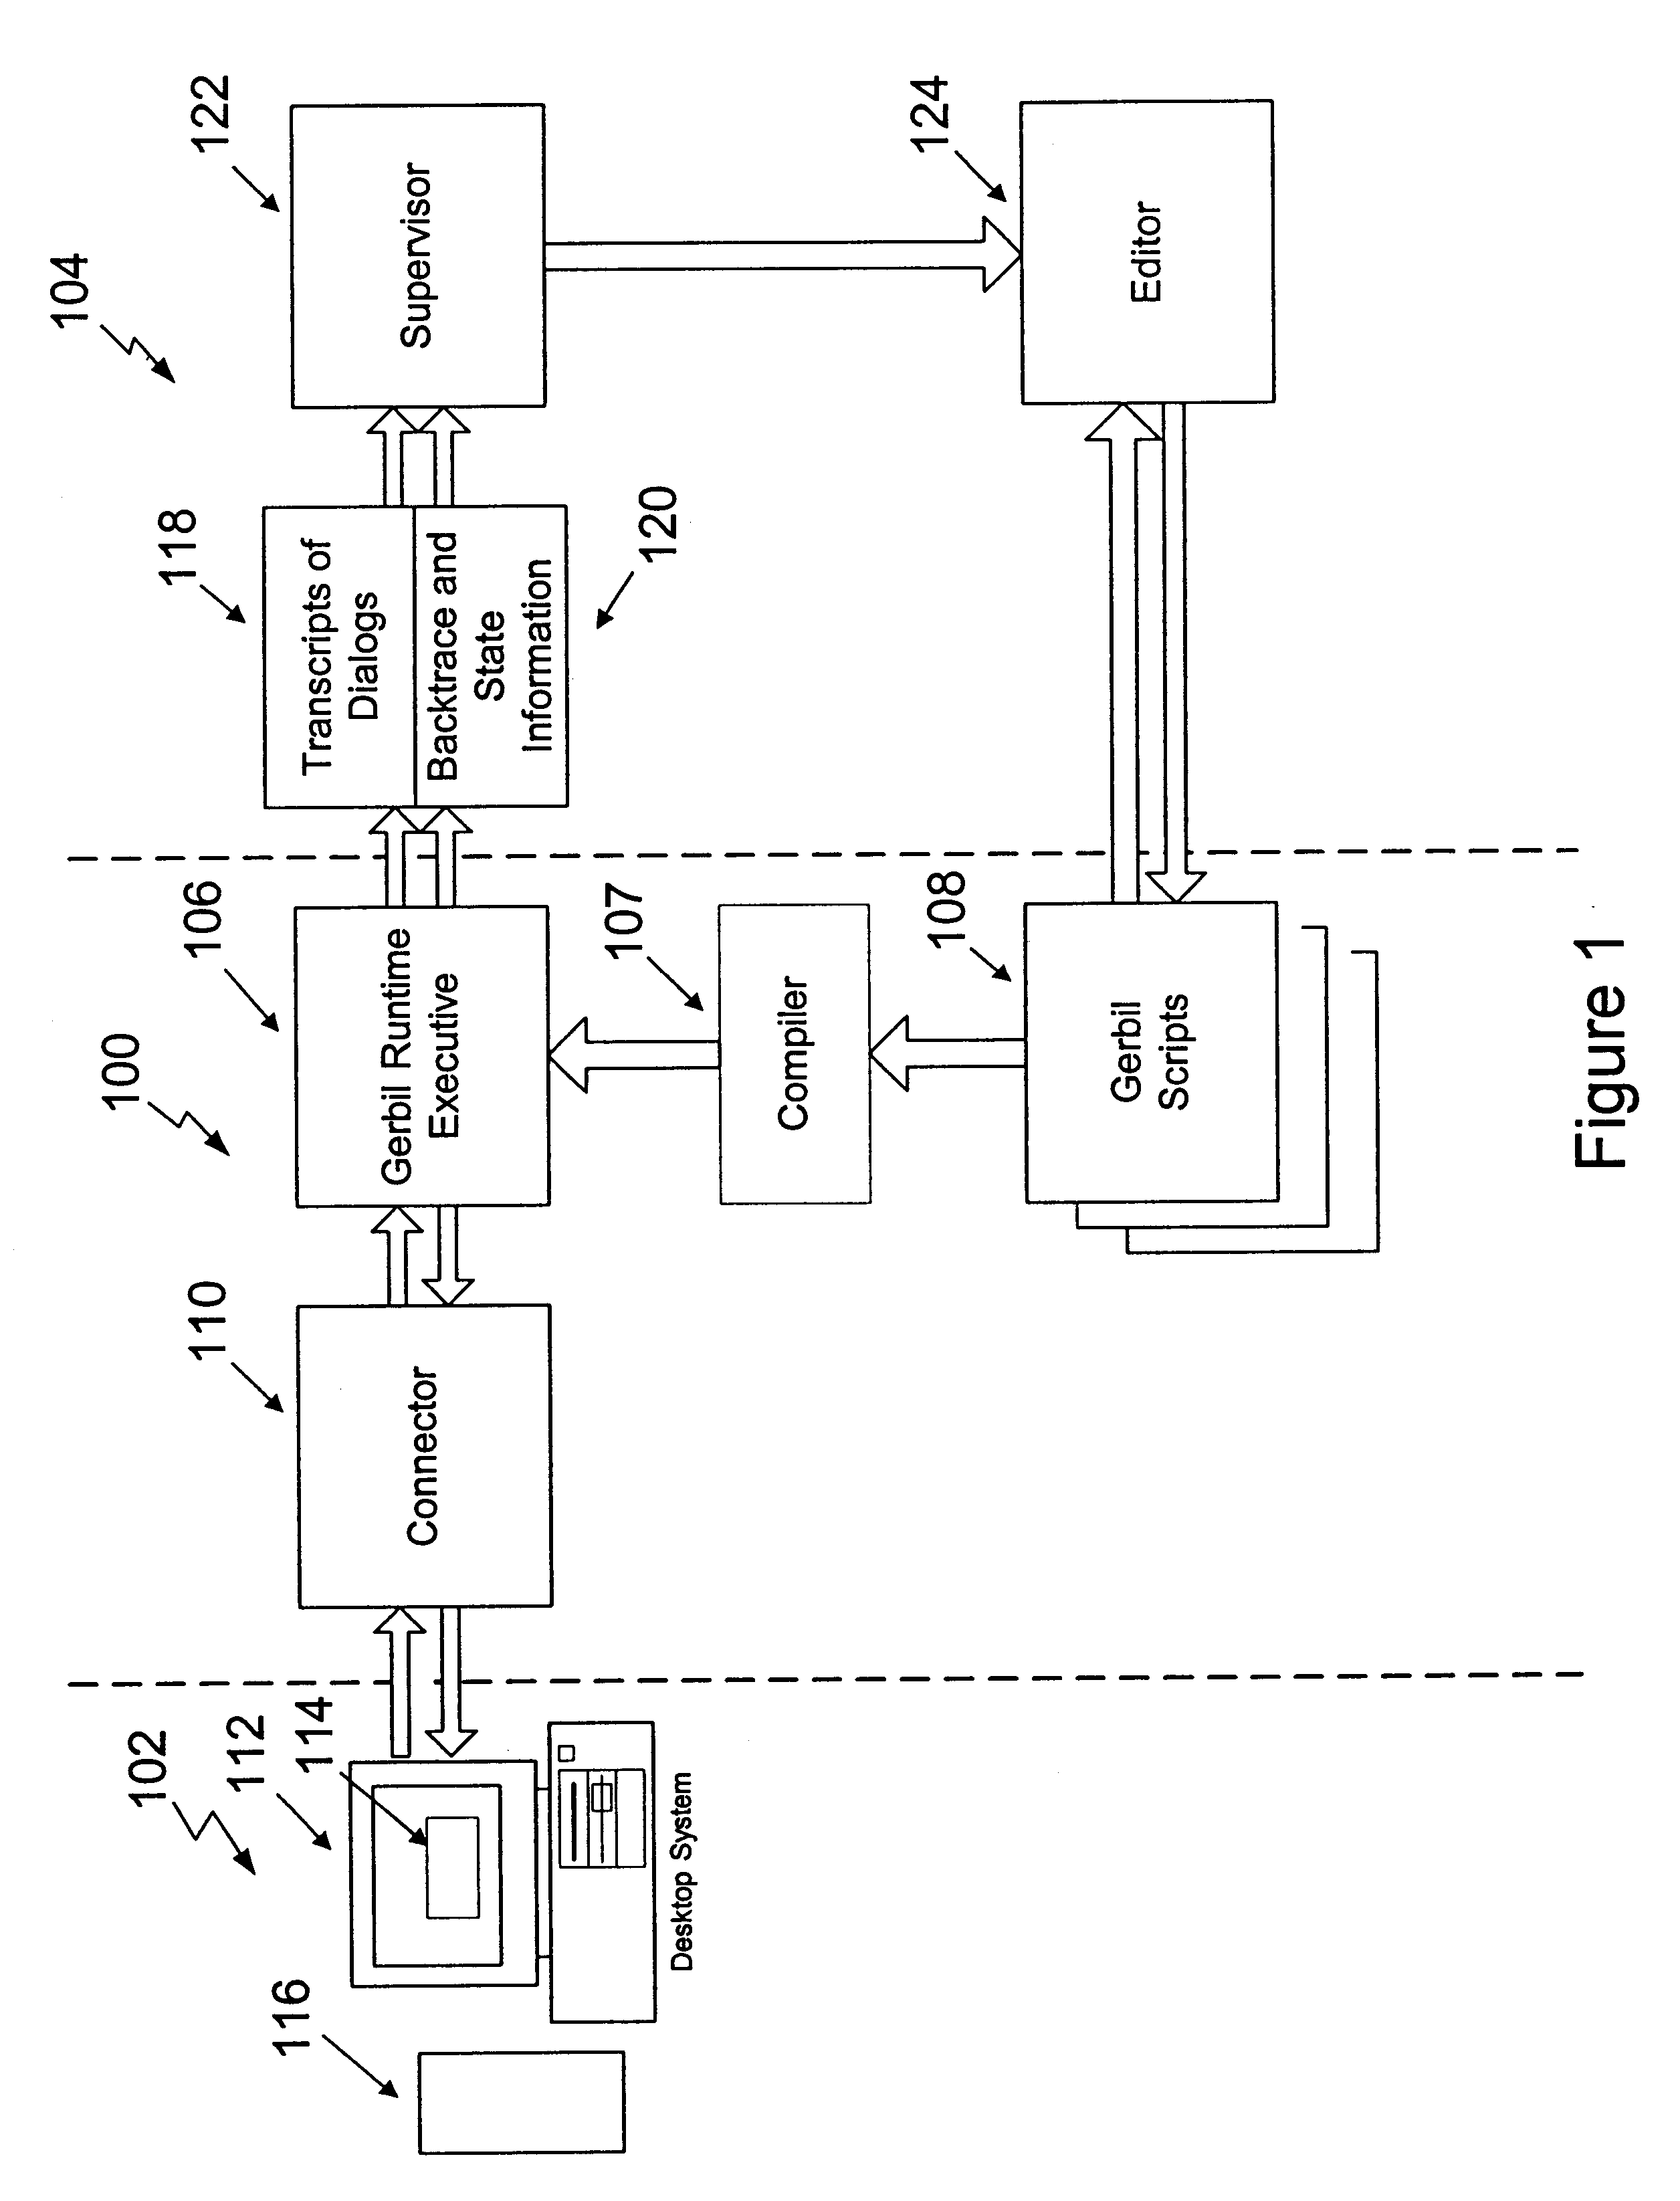 System and method for automatically verifying the performance of a virtual robot